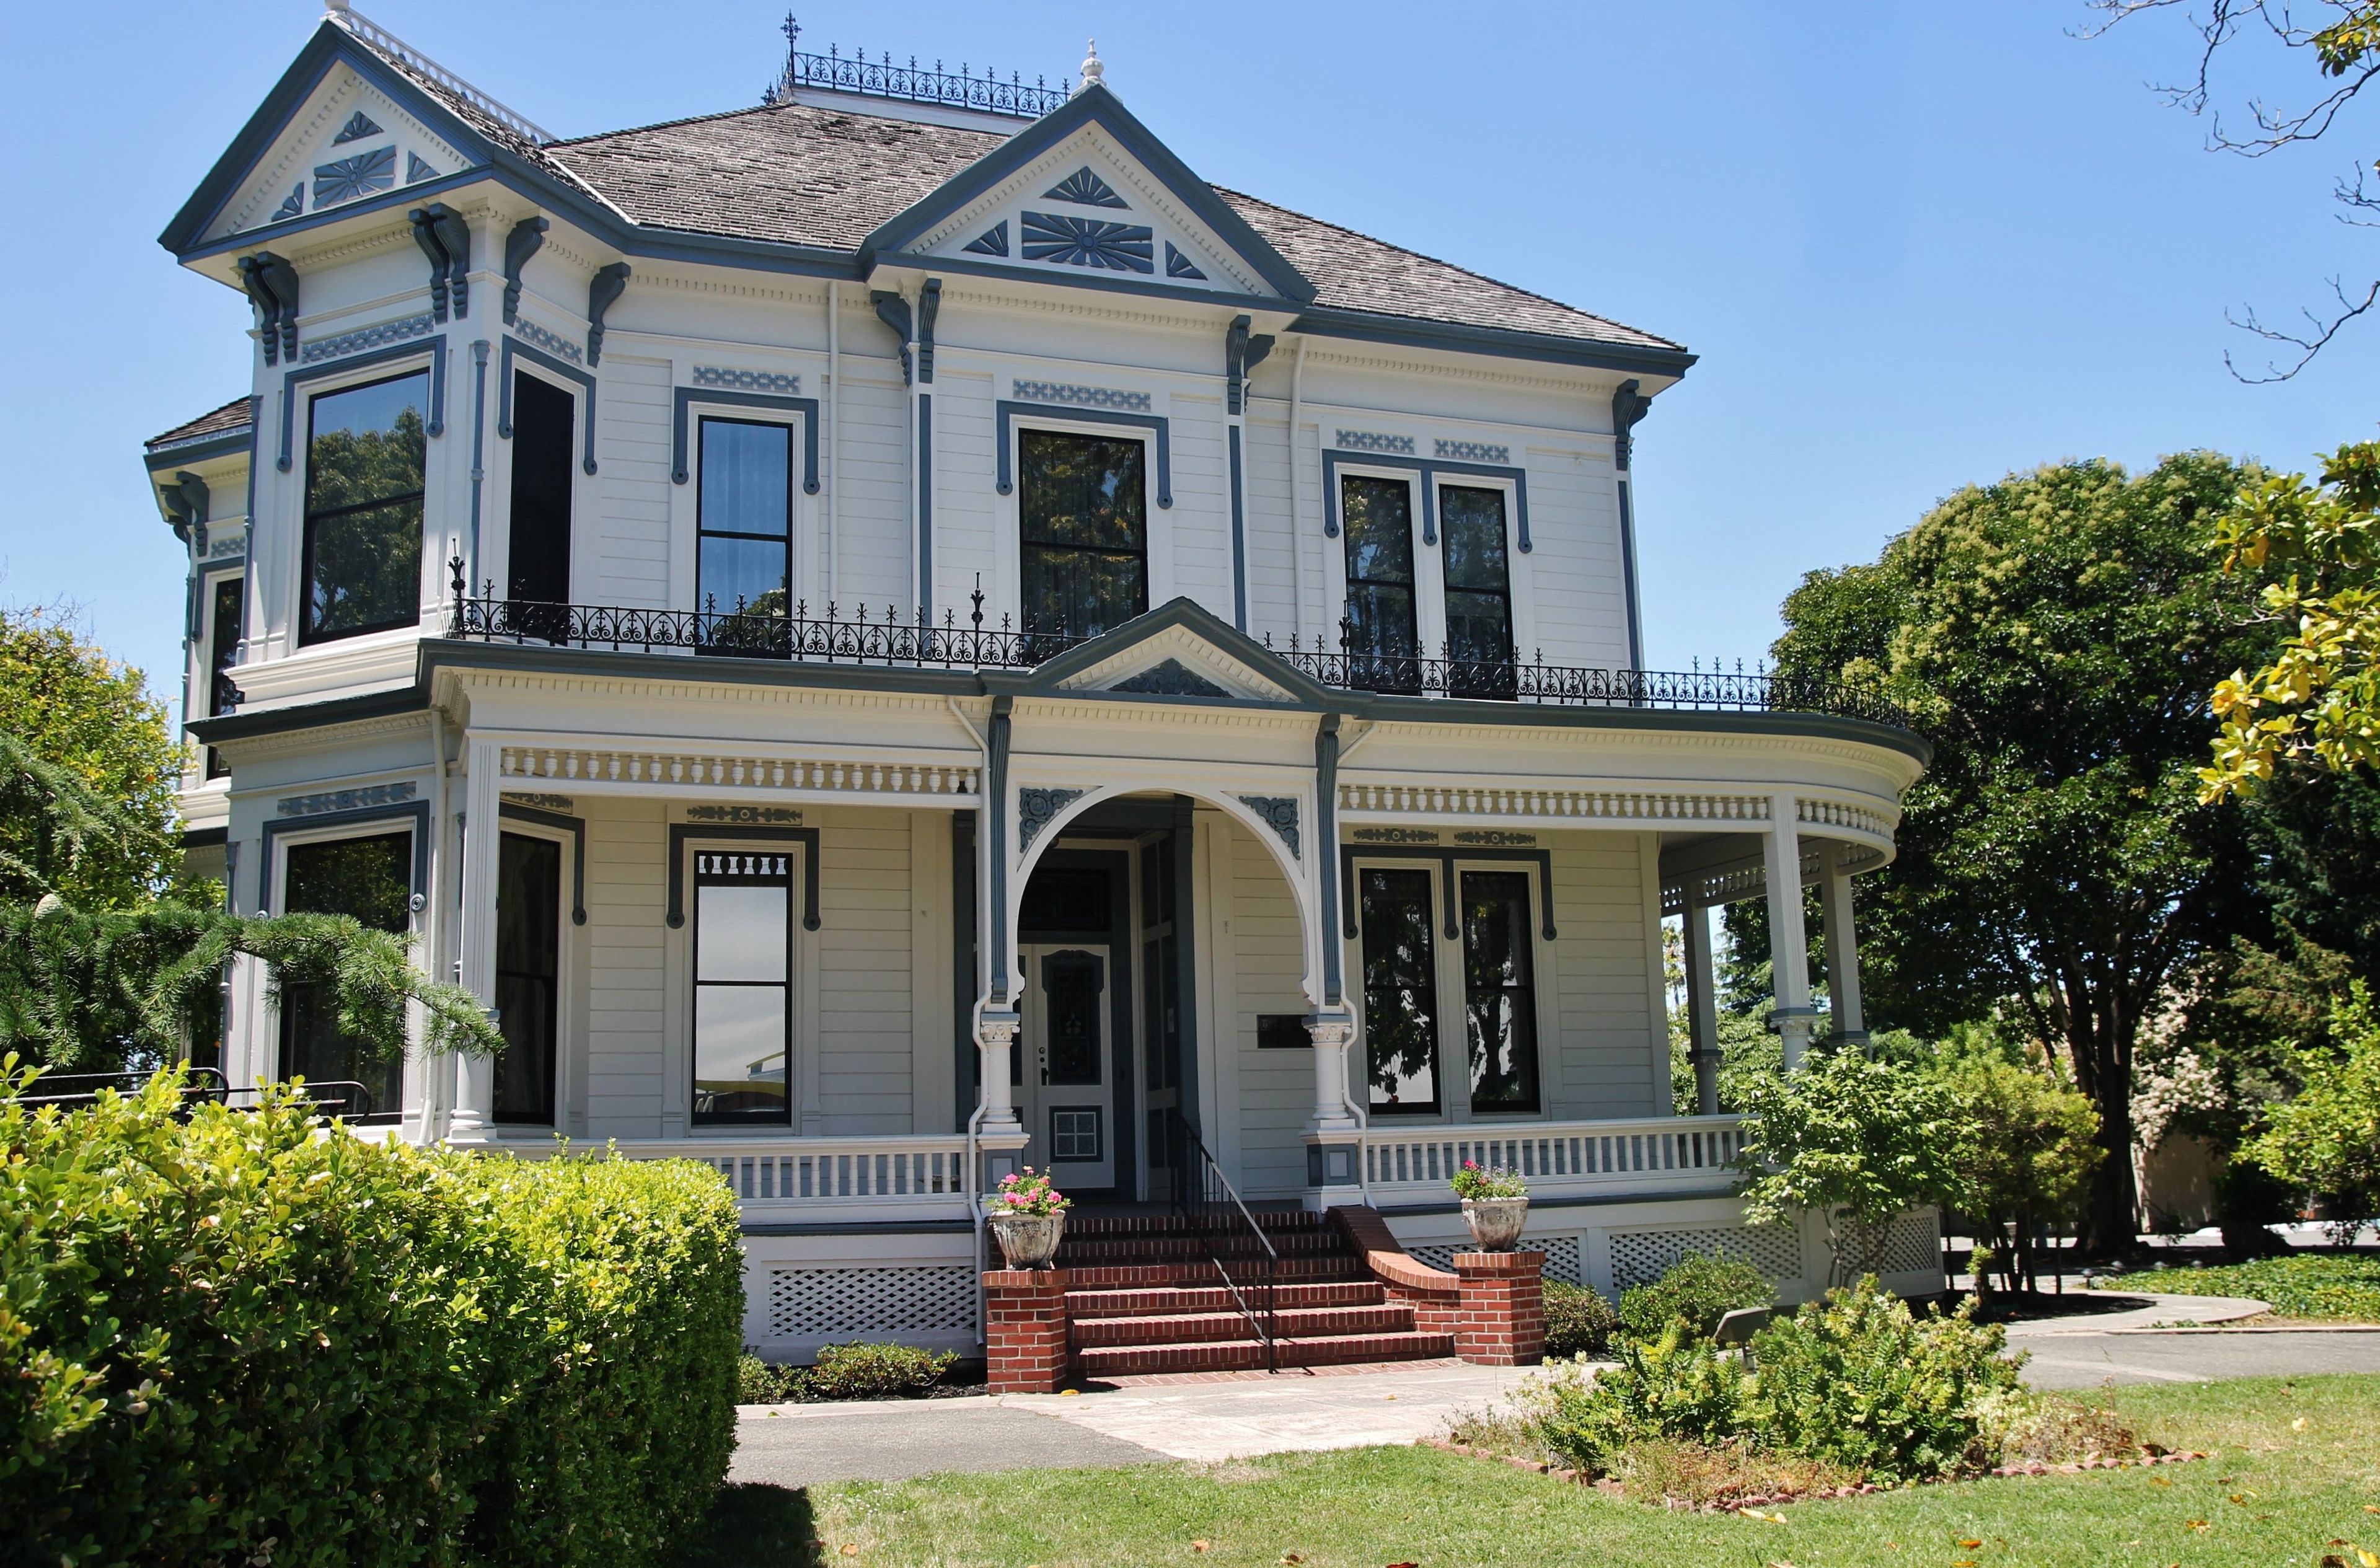 A white Victorian-style home.